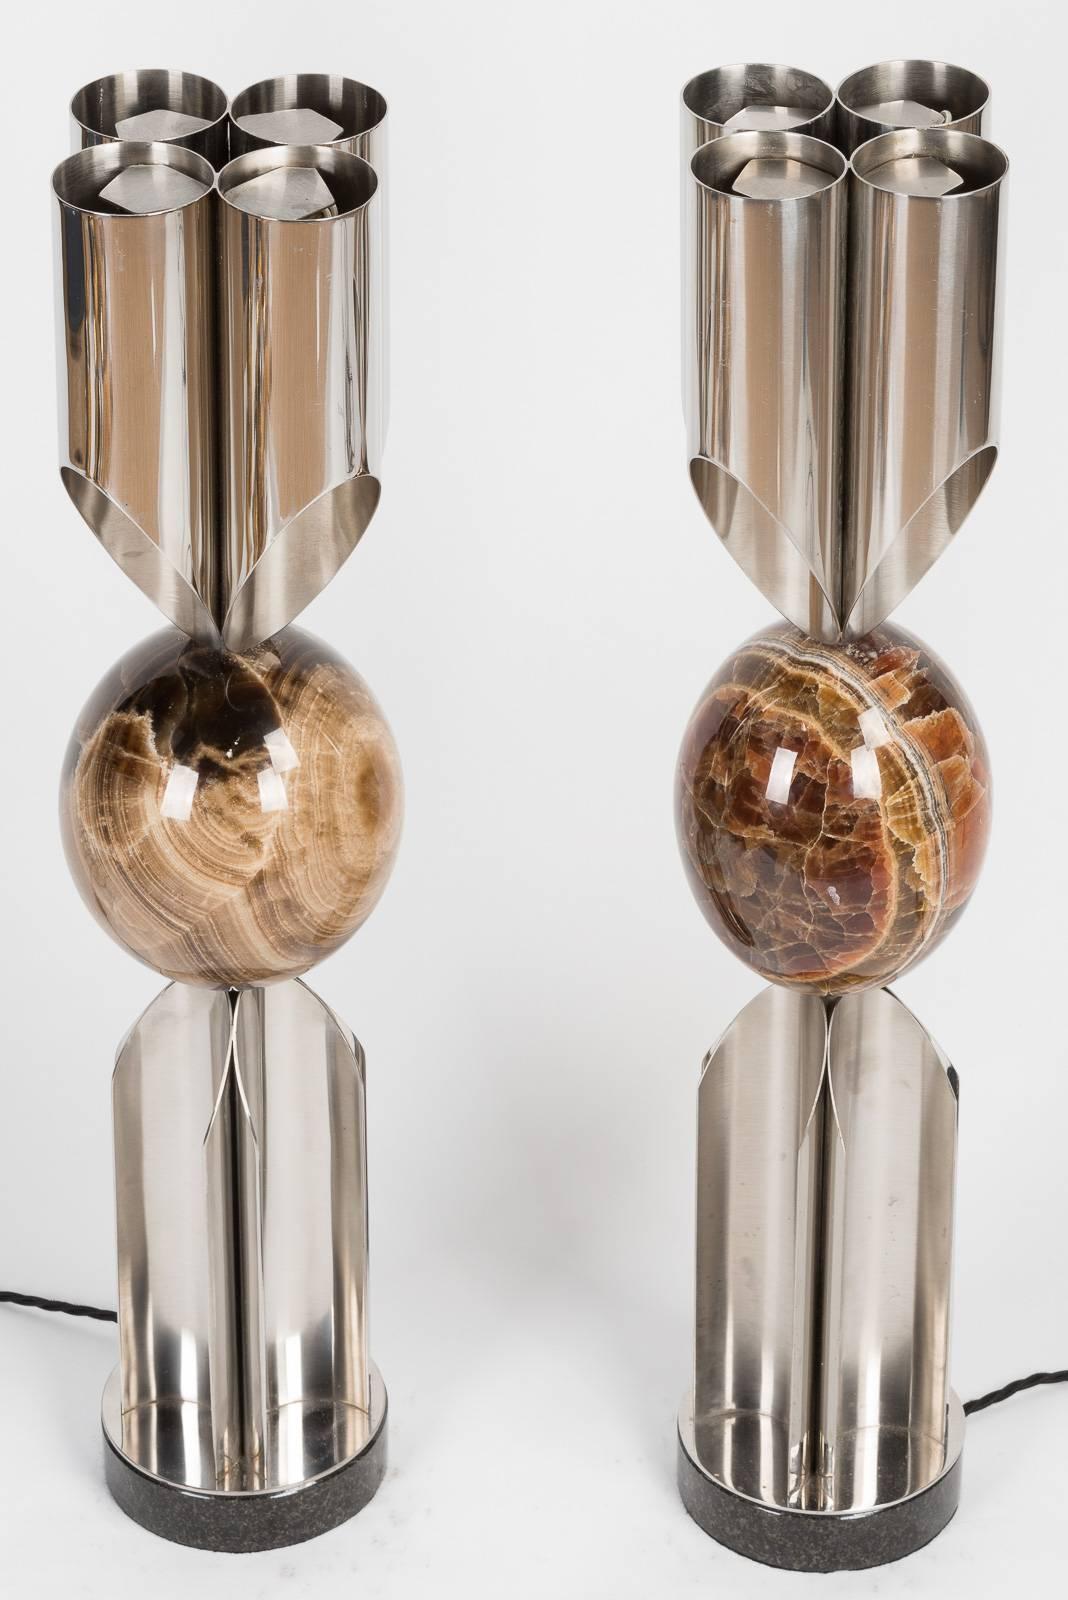 Stylish matched pair of rare stainless steel and fluorspar Orgues table lamps, circa 1968-1970, designed by Jacques Charles. One lamp is stamped 'Charles, made in France'
Rewired and earthed, ready for use.
Provenance: Estate of Chrystiane